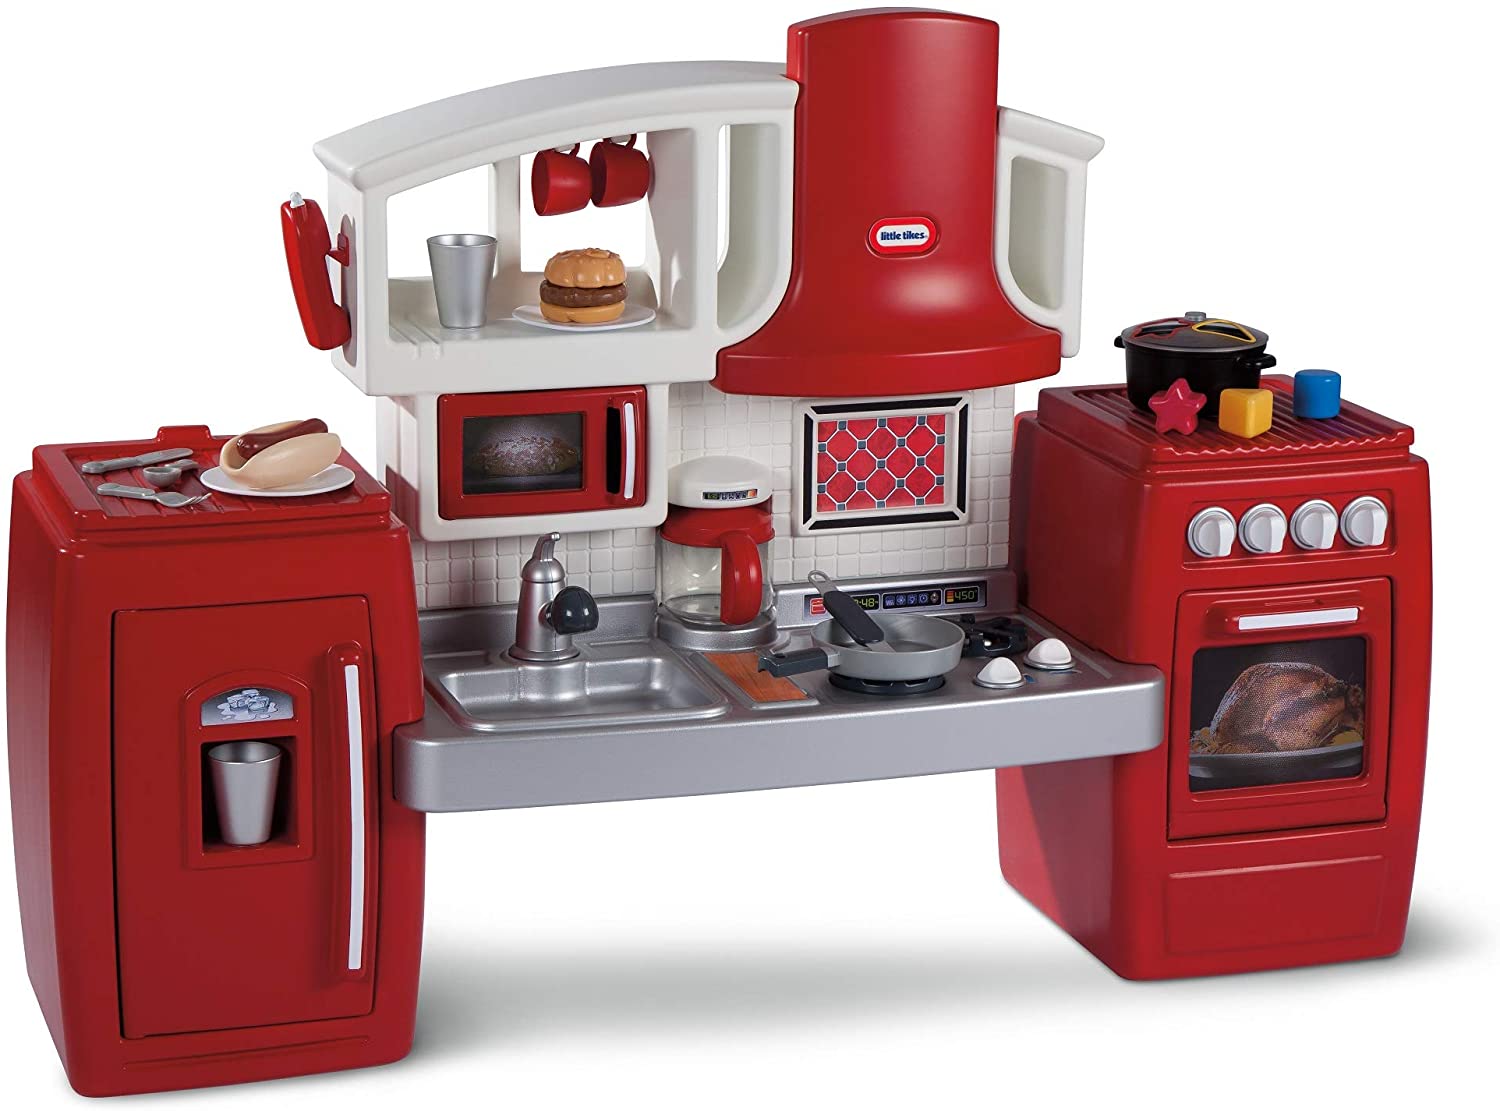 Little Tikes Cook 'n Grow Pretend Play Kids Toy Cooking Kitchen Play Set, Red - image 1 of 7